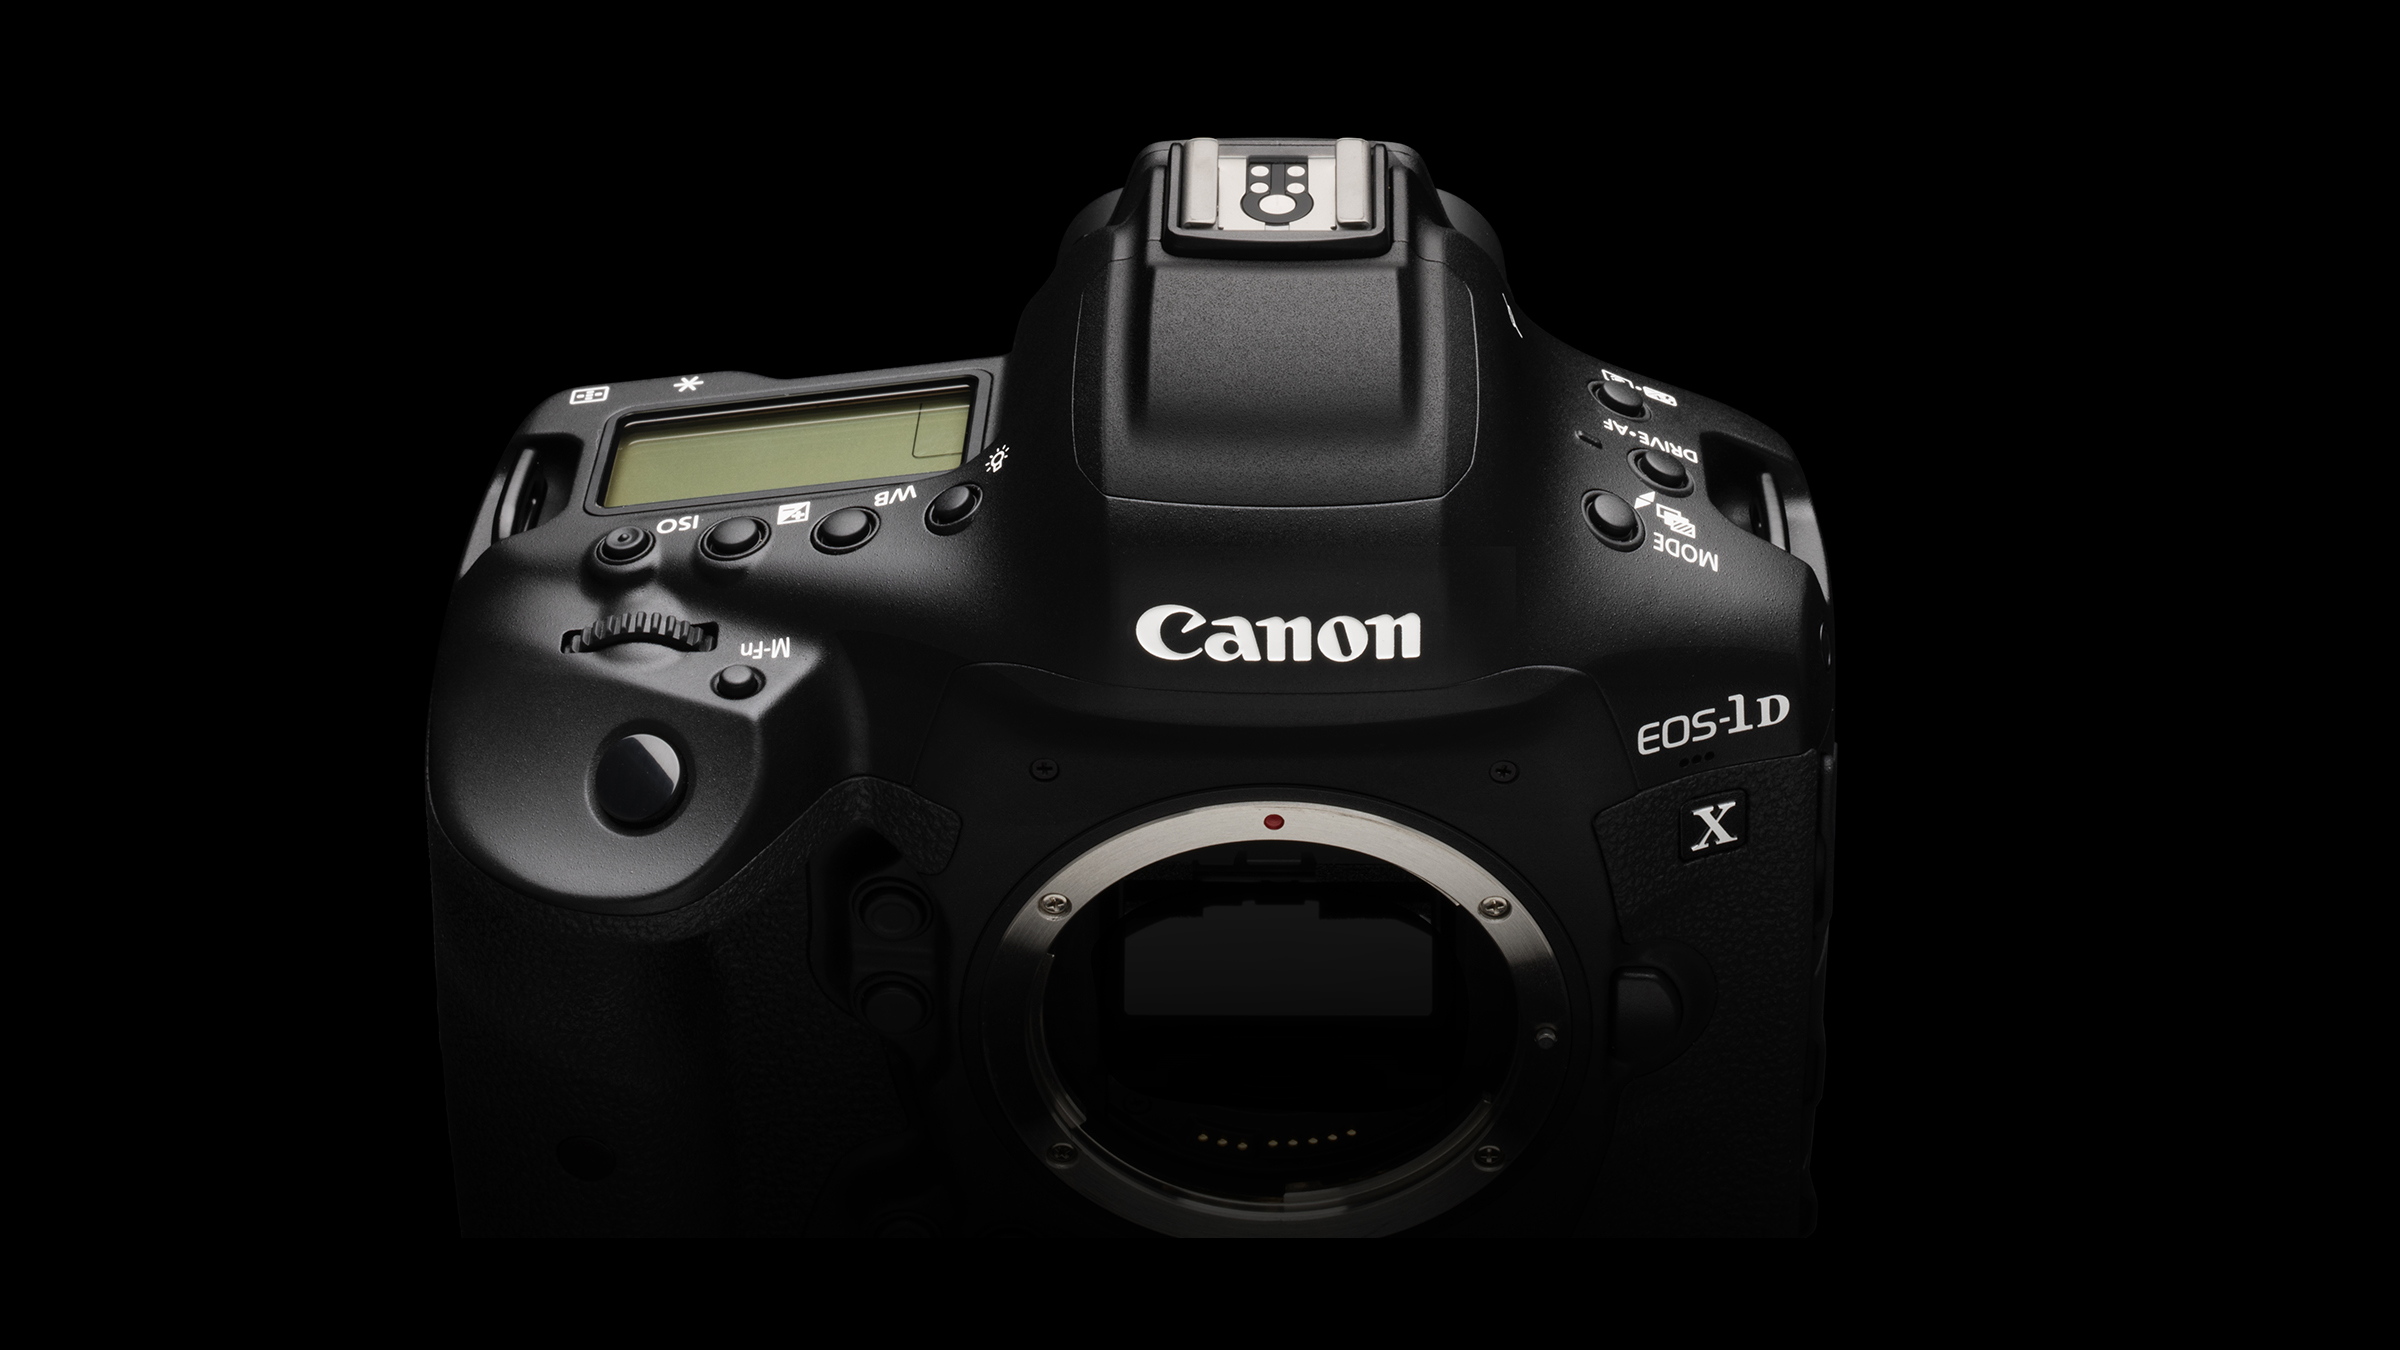 A top-down view of the Canon 1D X Mark III, one of the best Canon cameras, on a black background